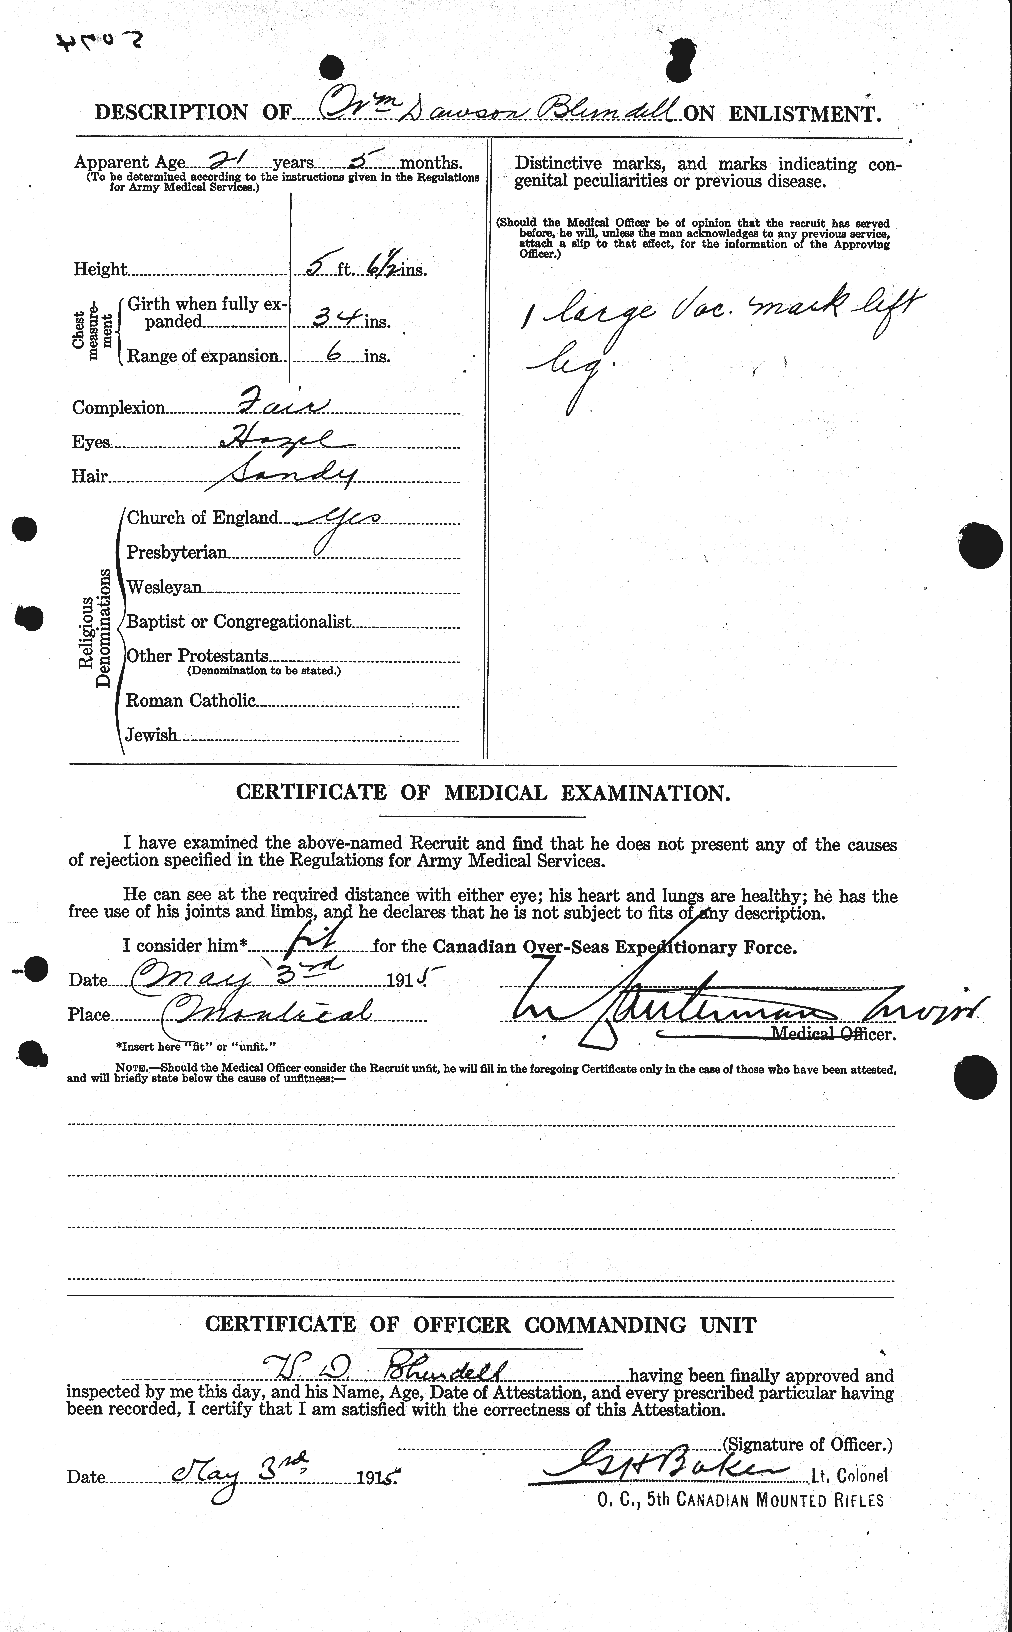 Personnel Records of the First World War - CEF 247210b